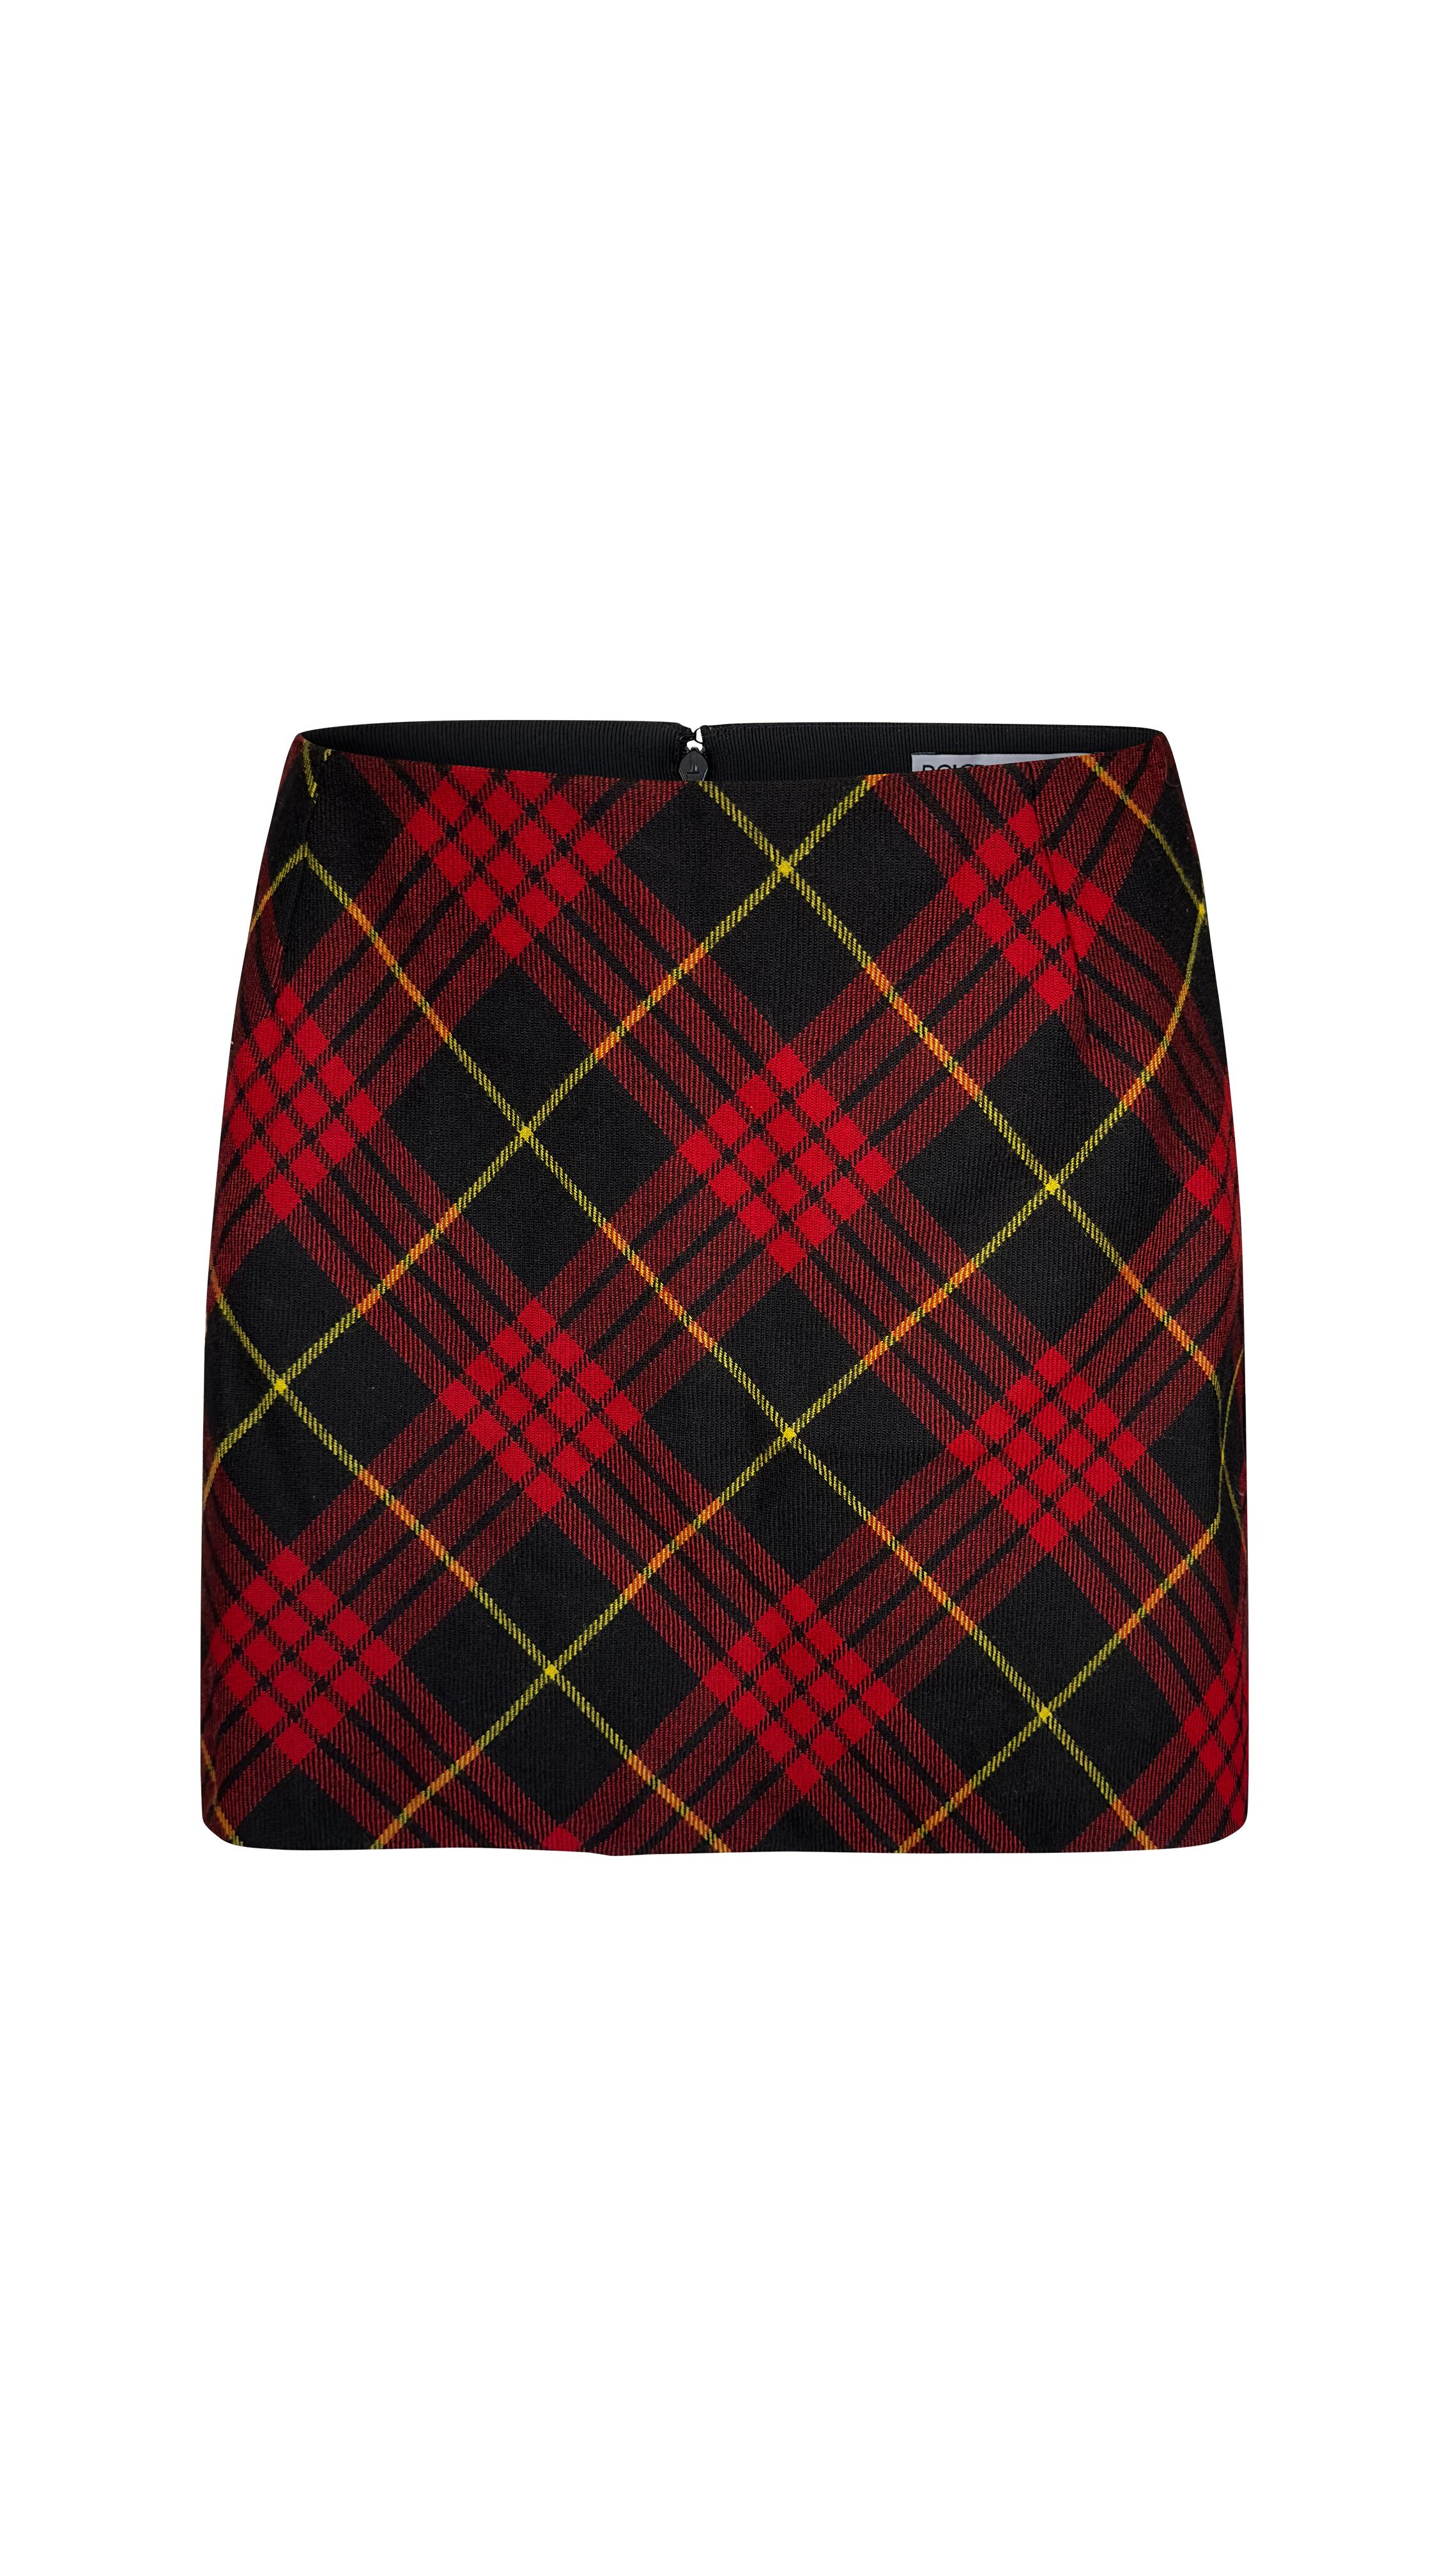 The skirt has a micro mini length in gorgeous vintage red and black tartan. This skirt has 2 slits laterally.
~Pristine conditions
~100% wool 
~Made in Italy 
~Size IT40 but fits size xs -UK 6